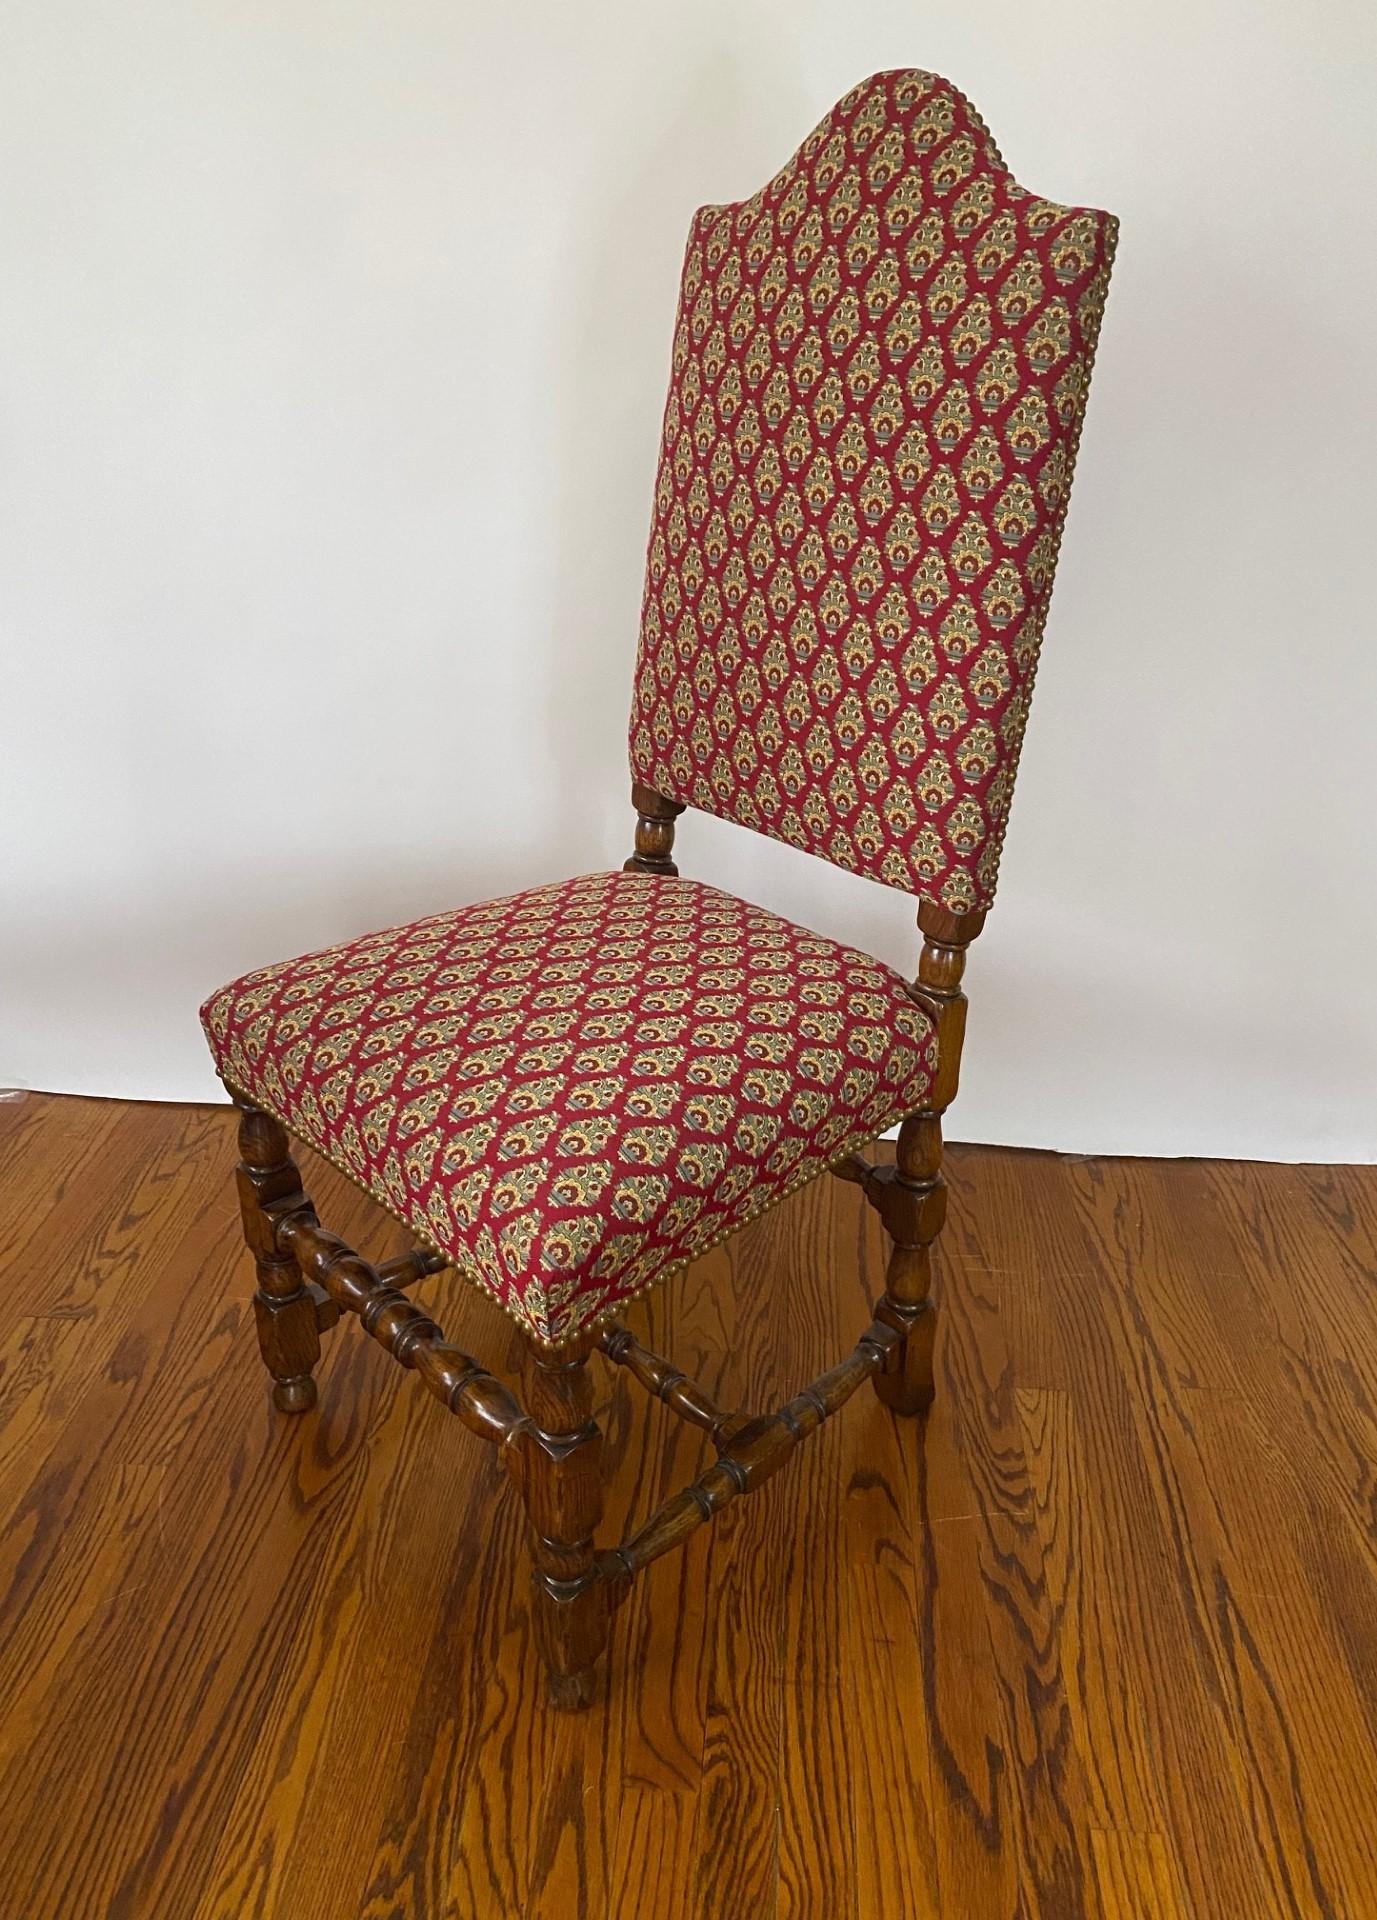 English-Made Late 17th Century Style Solid Oak High Back Side & Arm Chair For Sale 2